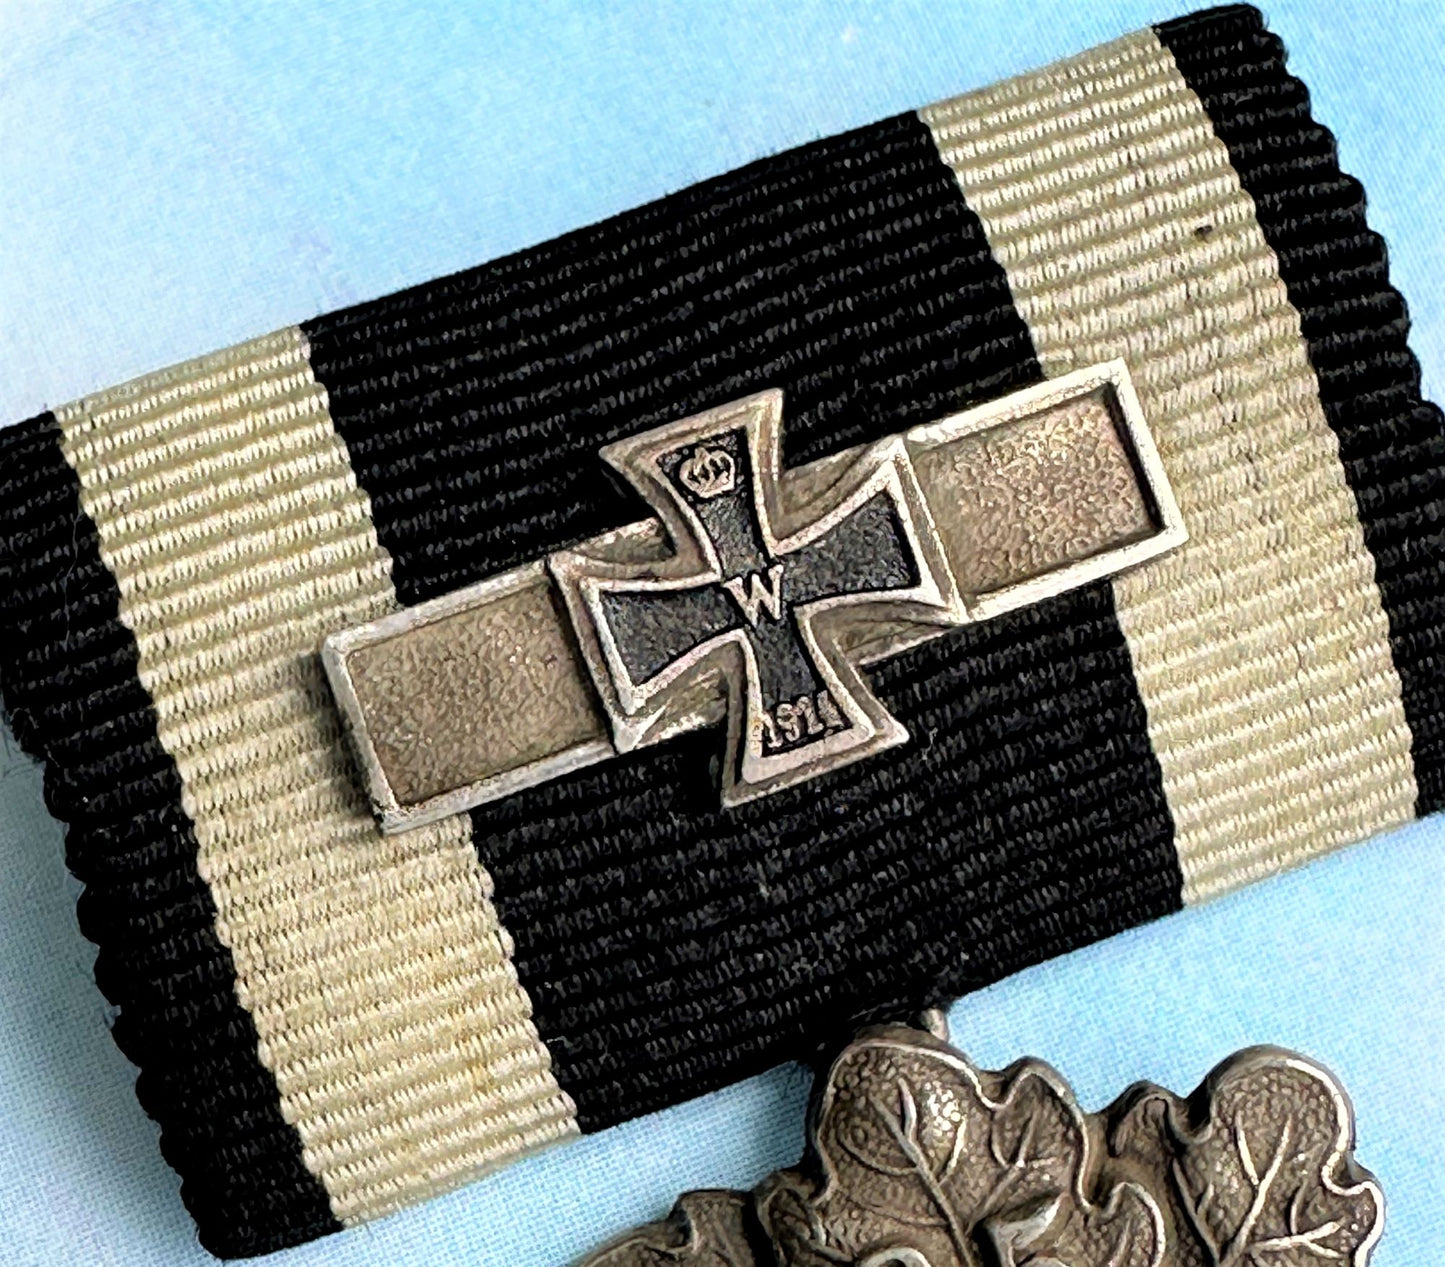 German Iron Cross Miniature 1870 2nd class with 25 year oak leaves and 1914 spange - Derrittmeister Militaria Group